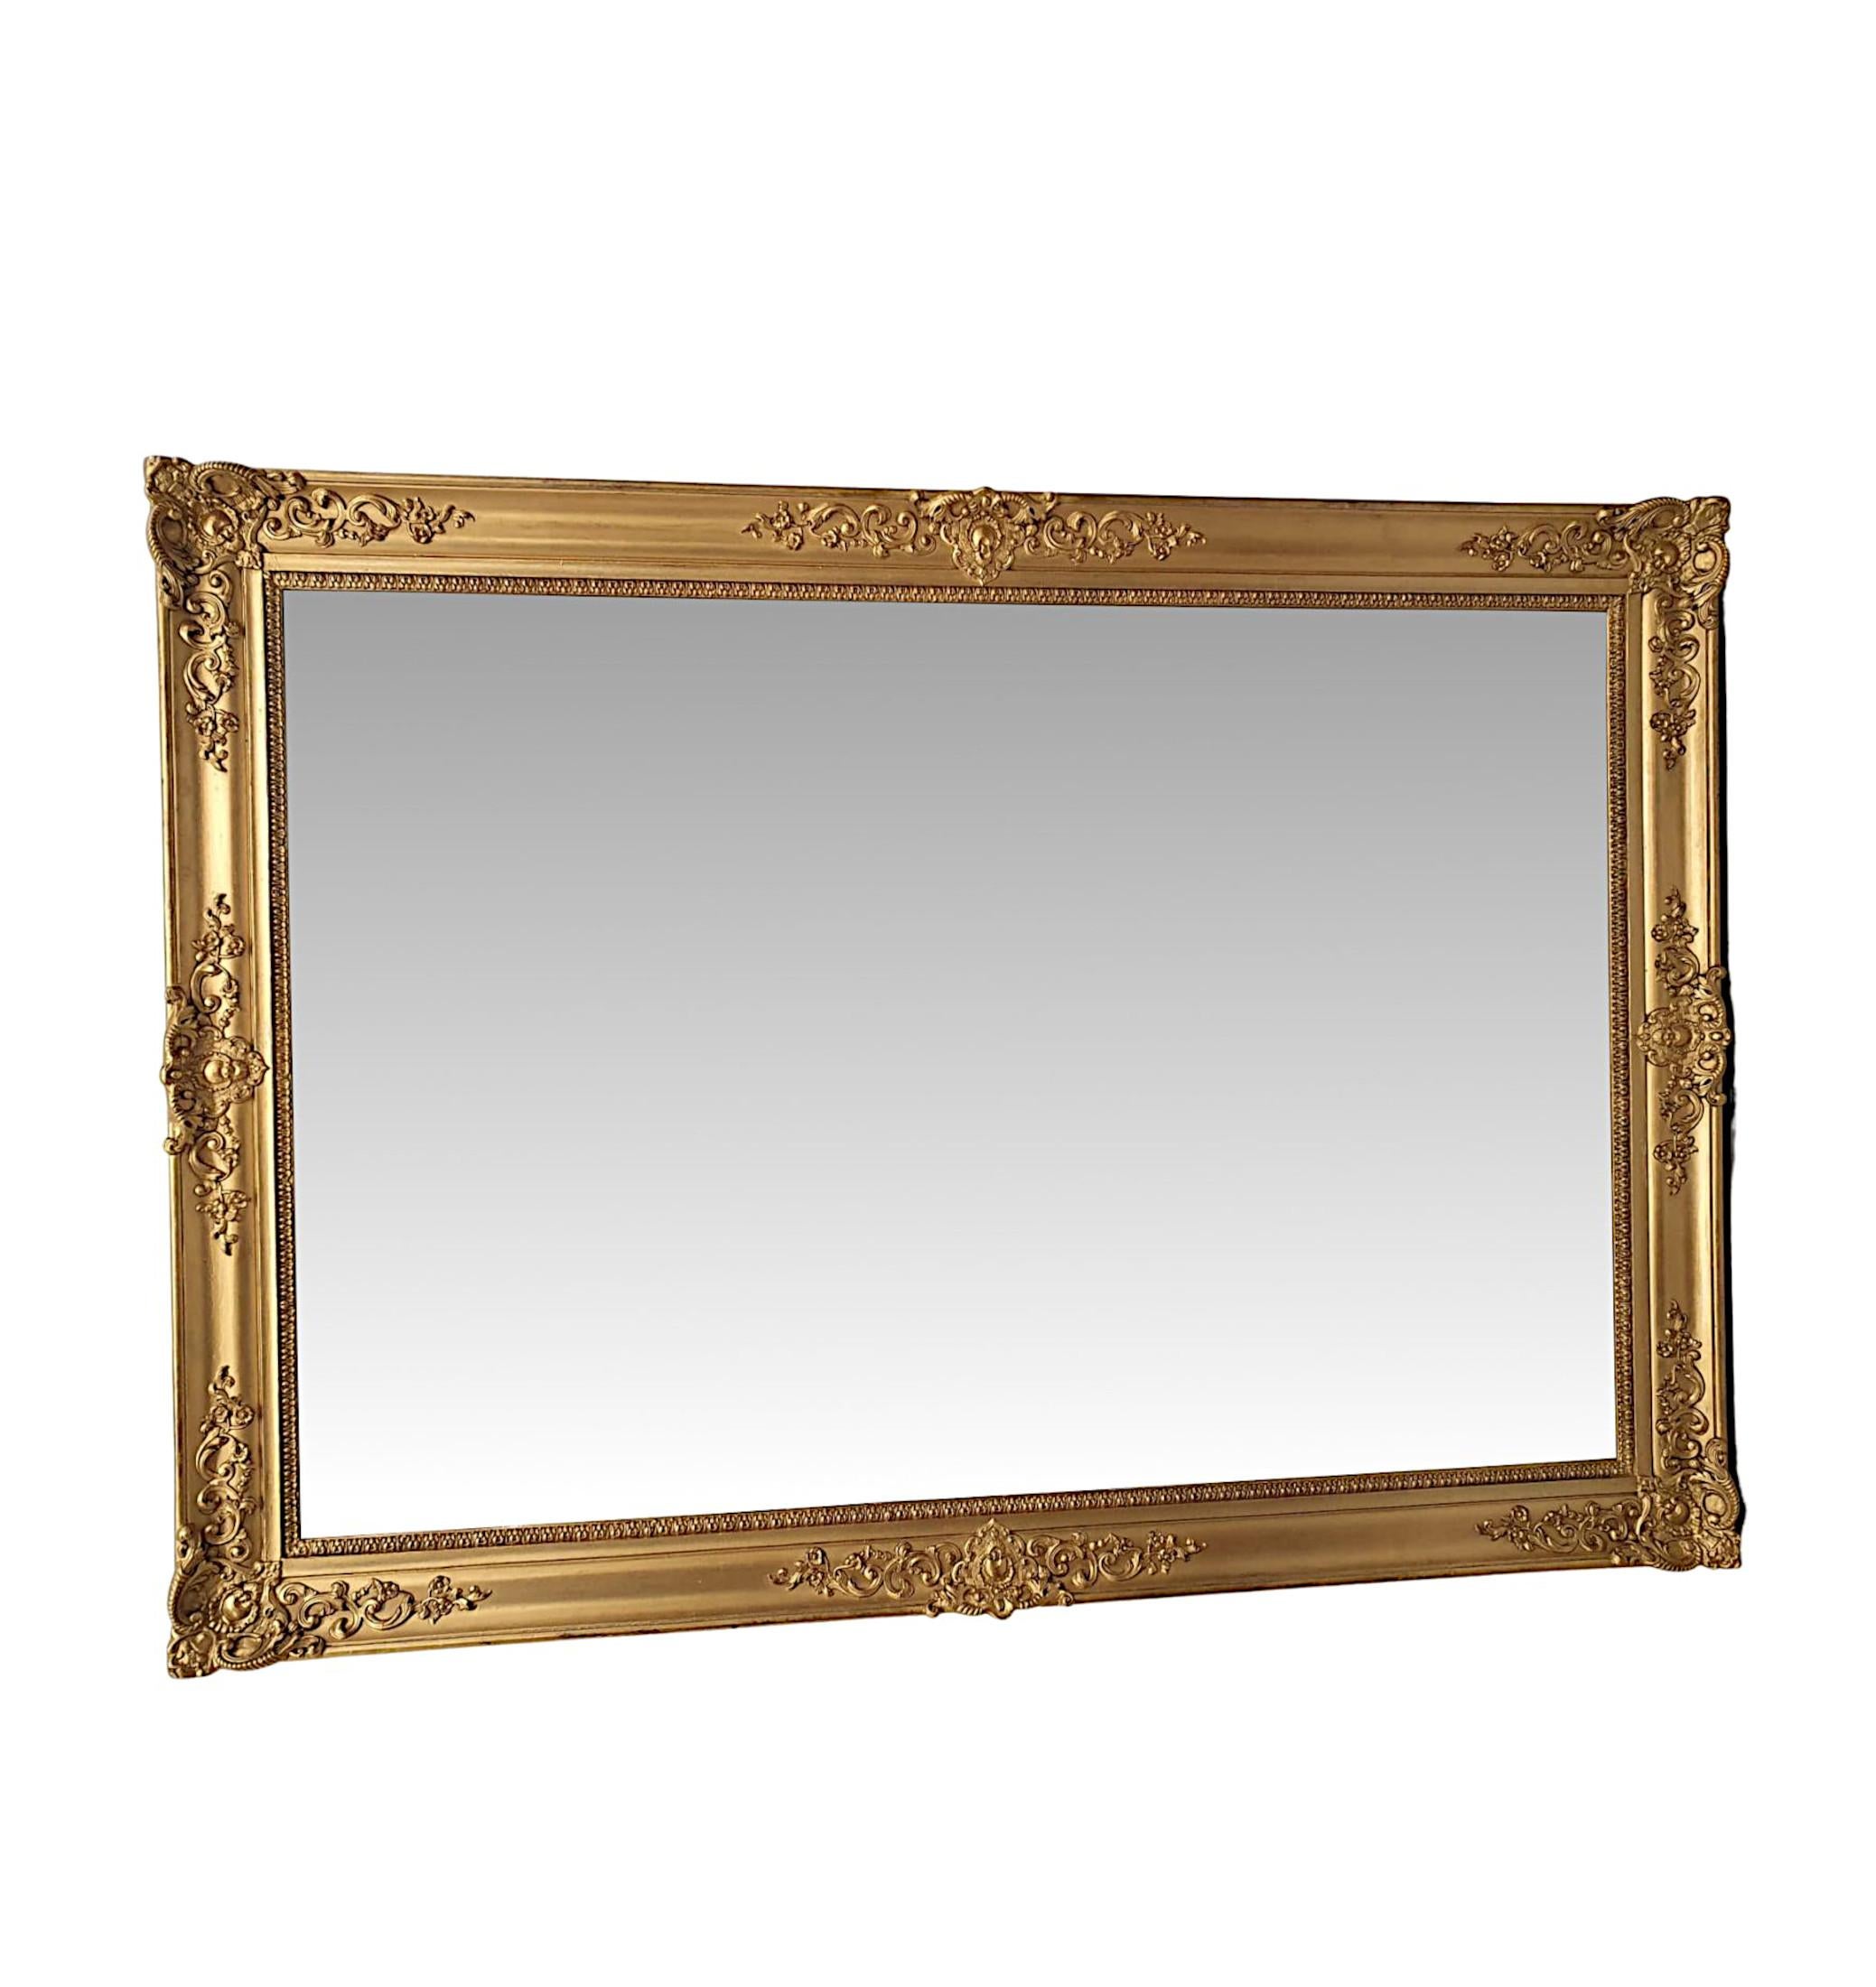 A gorgeous 19th century giltwood overmantle mirror. The mirror glass plate of rectangular form is set within a finely hand carved, moulded and fluted giltwood frame with a beautiful lambs tongue border and with fabulously detailed and elegant motifs